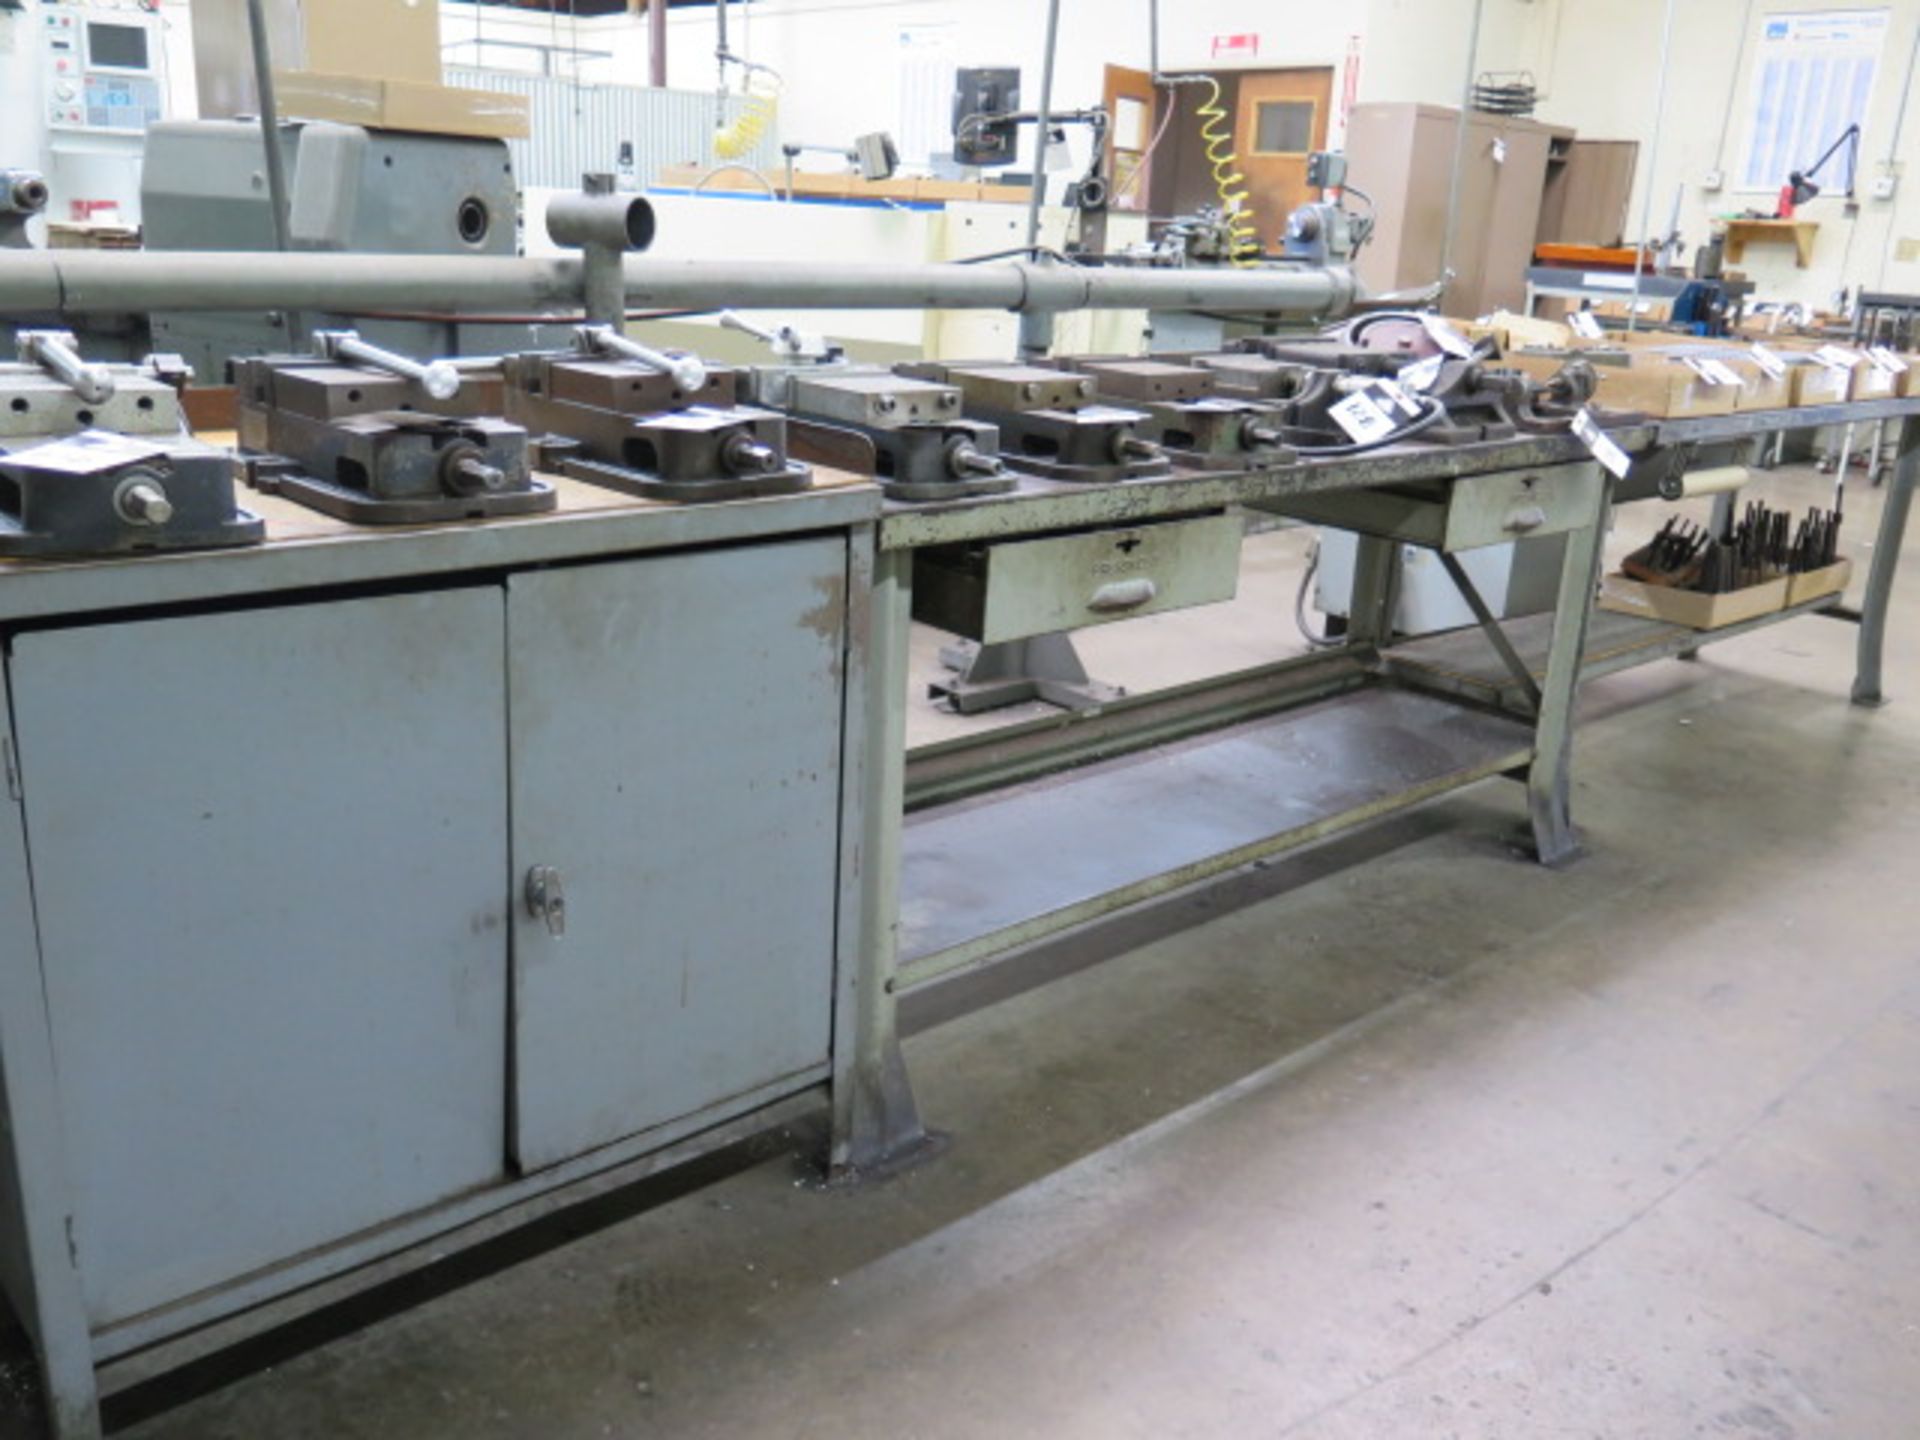 Steel Work benches (2) and Storage Cabinet (SOLD AS-IS - NO WARRANTY)